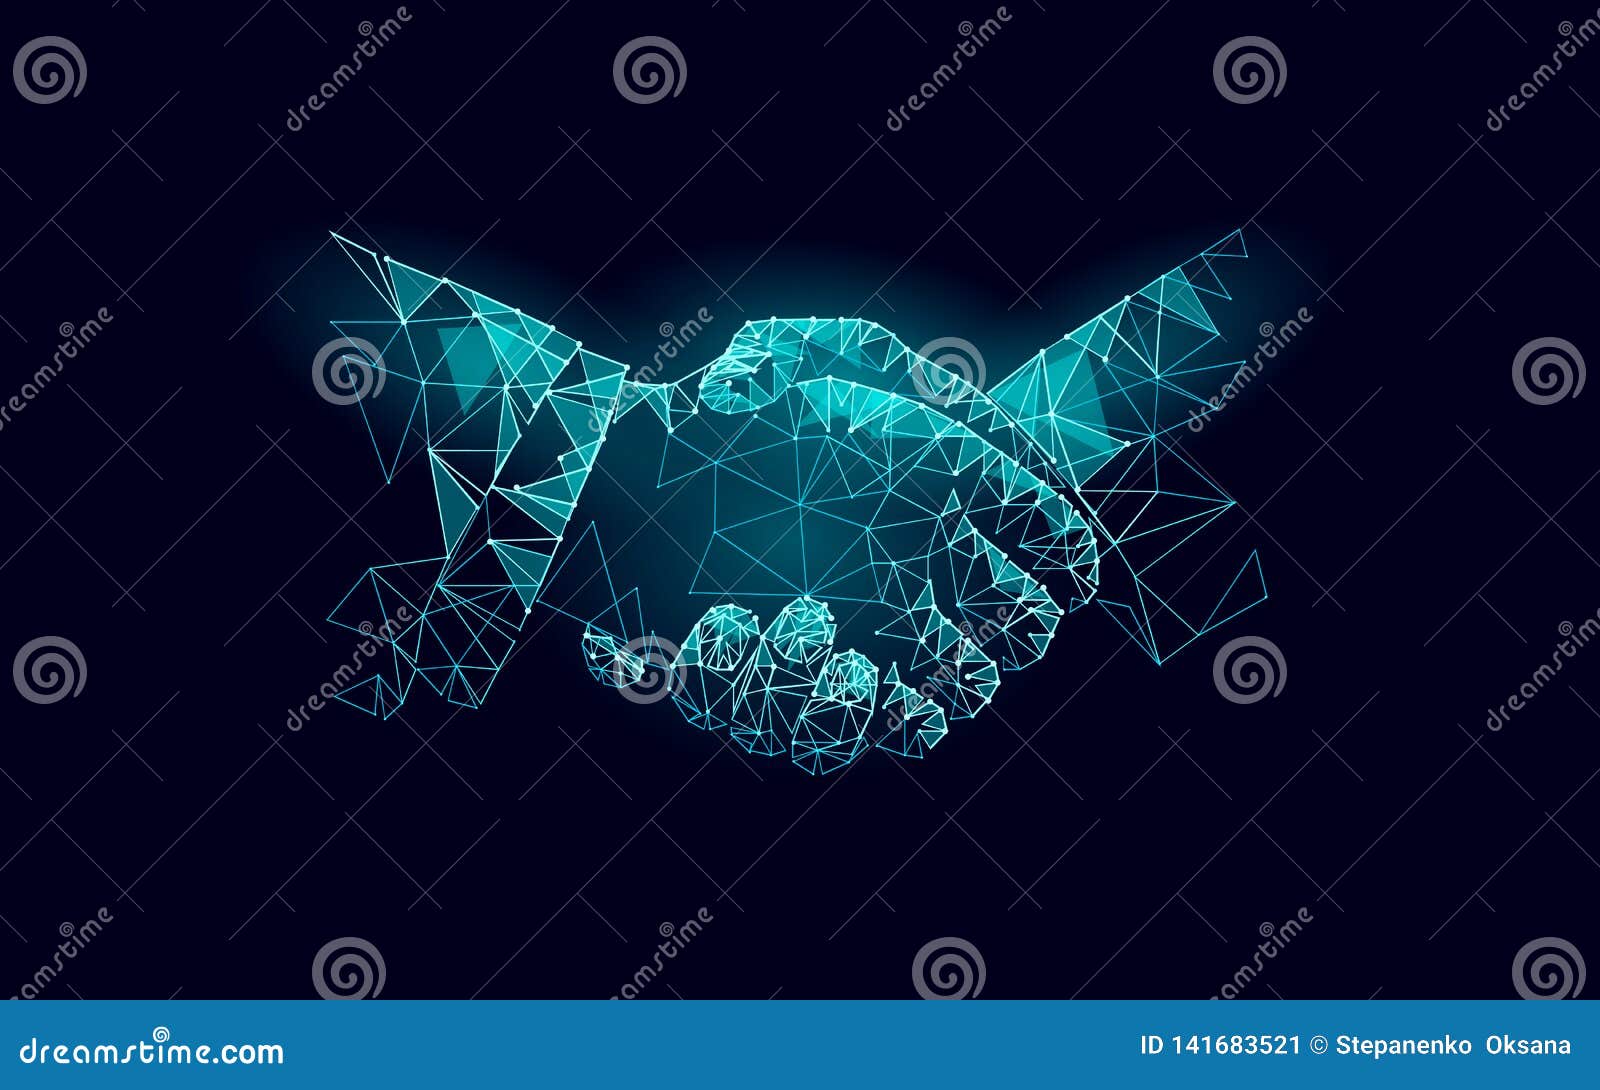 two hands handshake business agreement. low poly polygonal triangle professional work partnership. office succsesfull